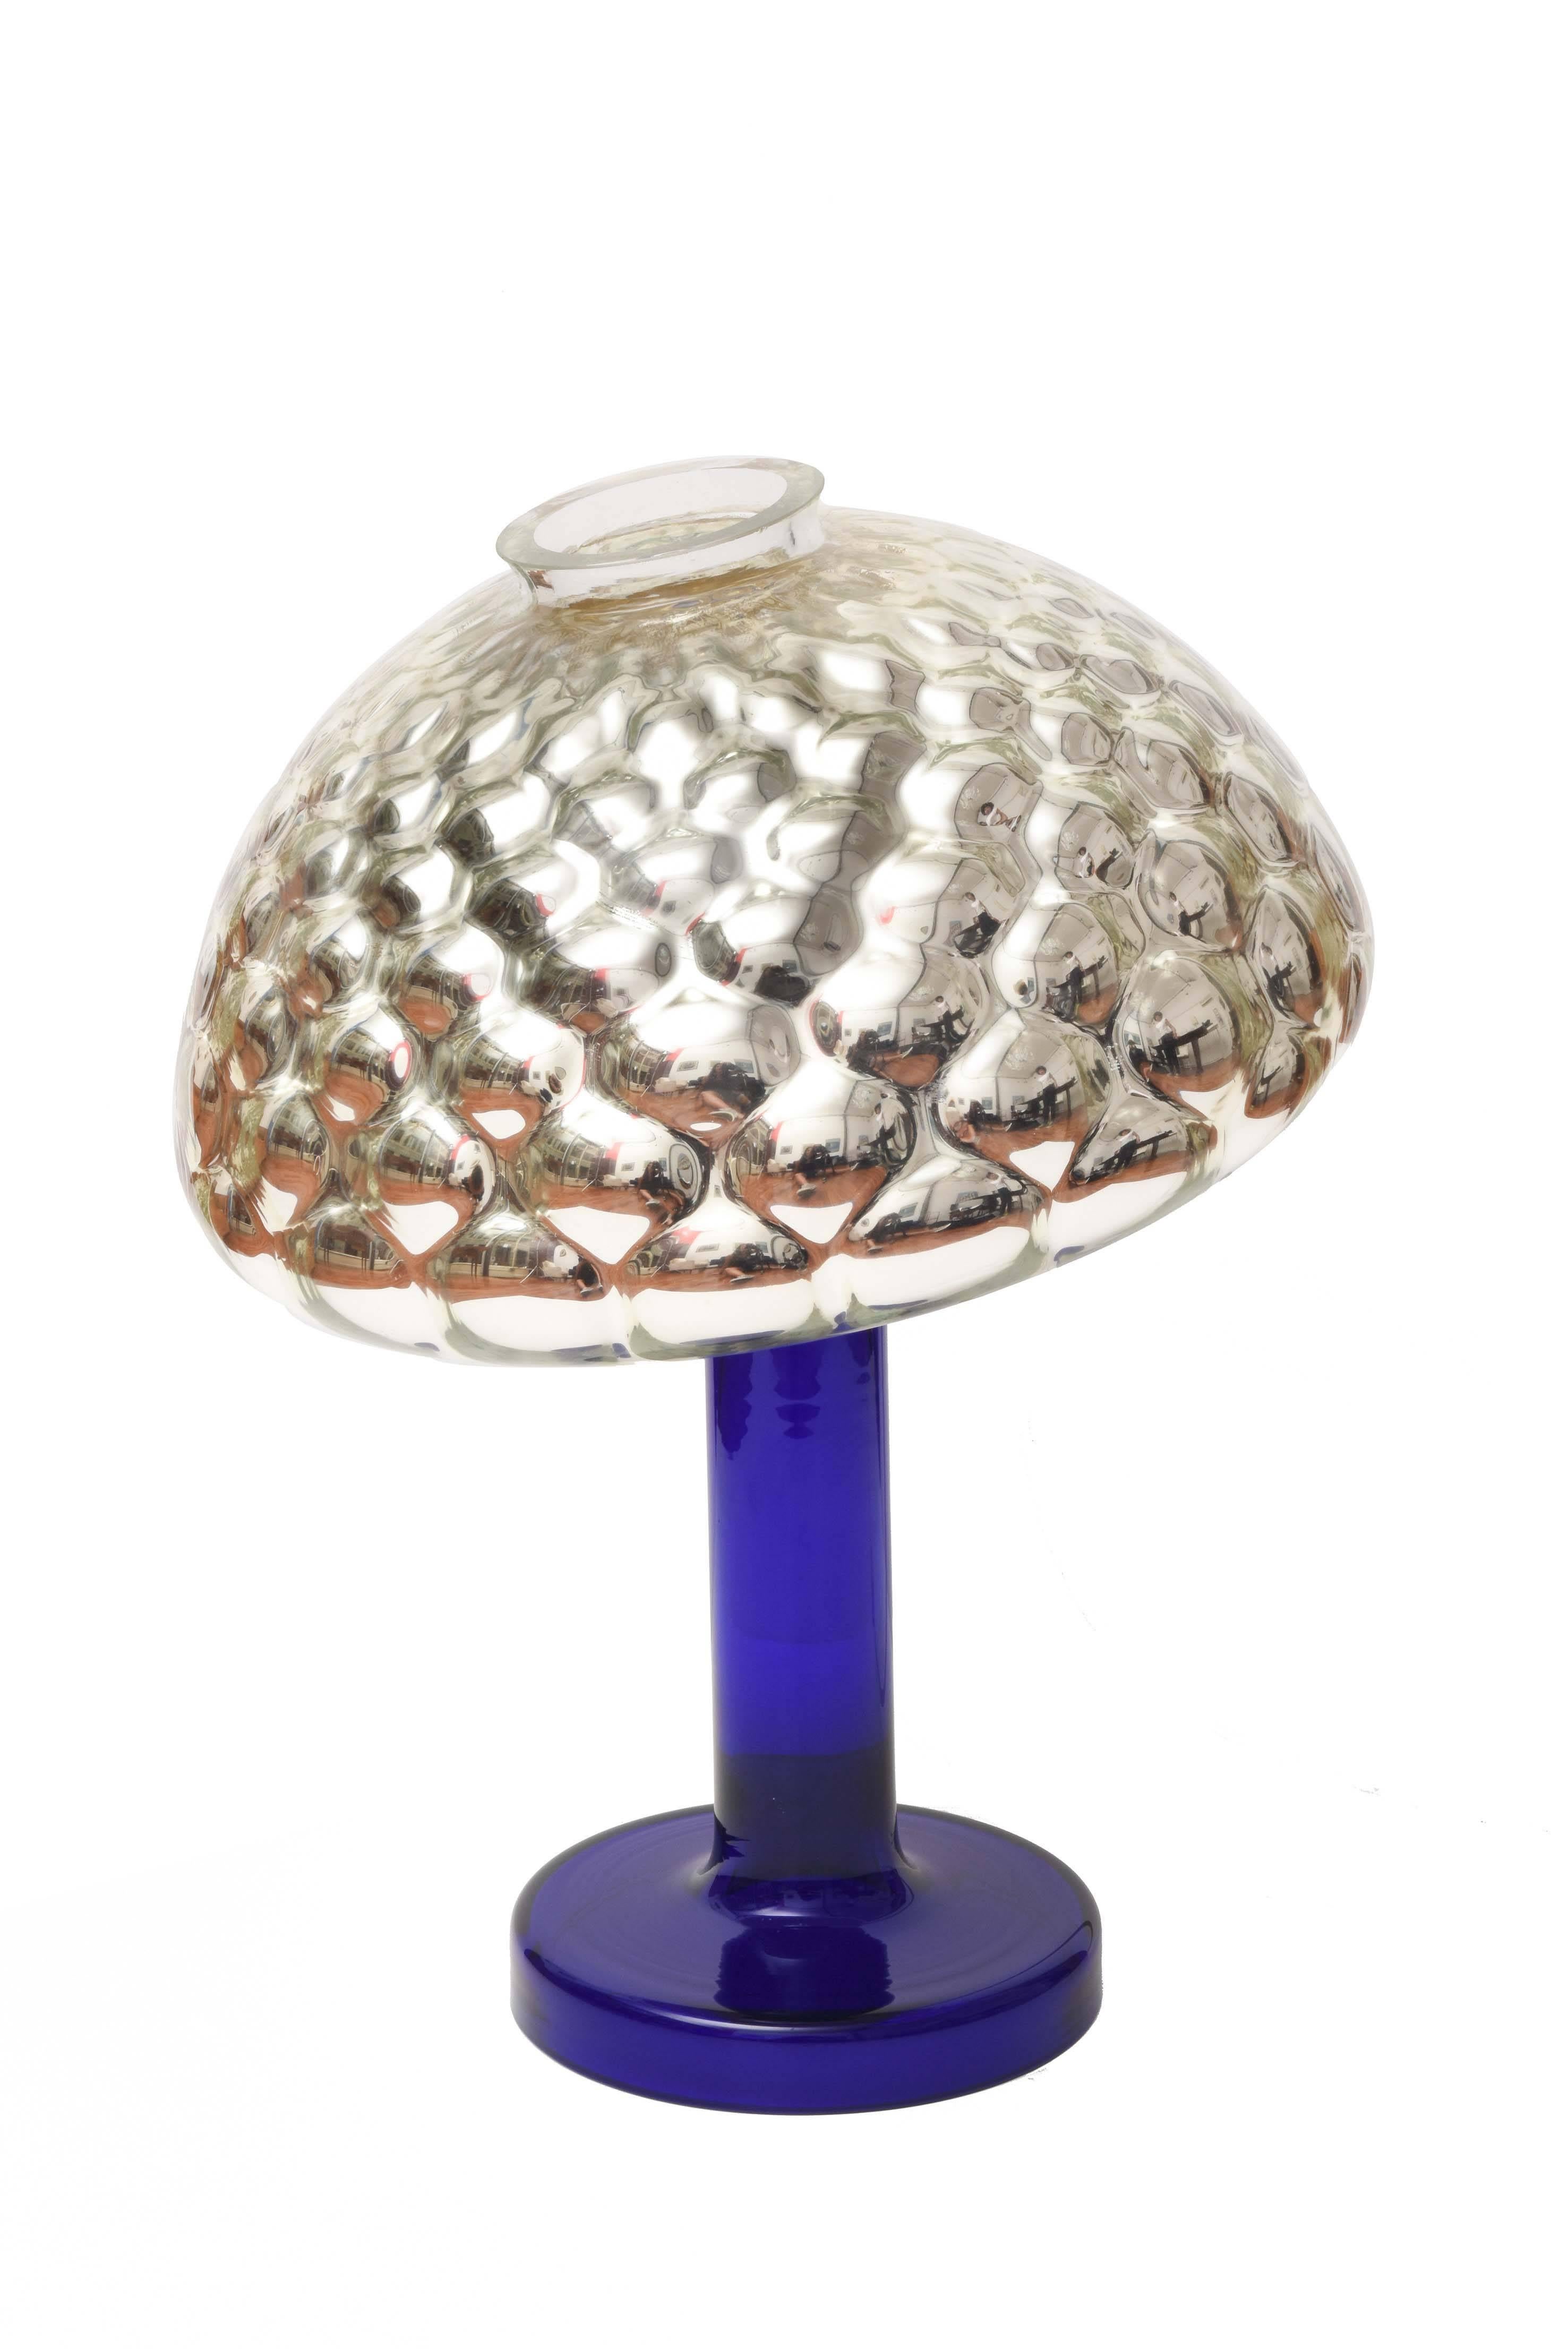 Table halogen lamp. Base and stem in cobalt blue glass in a single piece. Adjustable diffuser in silver optical glass honeycomb leaning against the base and removable. Electrical equipment resting on the bottom of the lampshade magnetically and